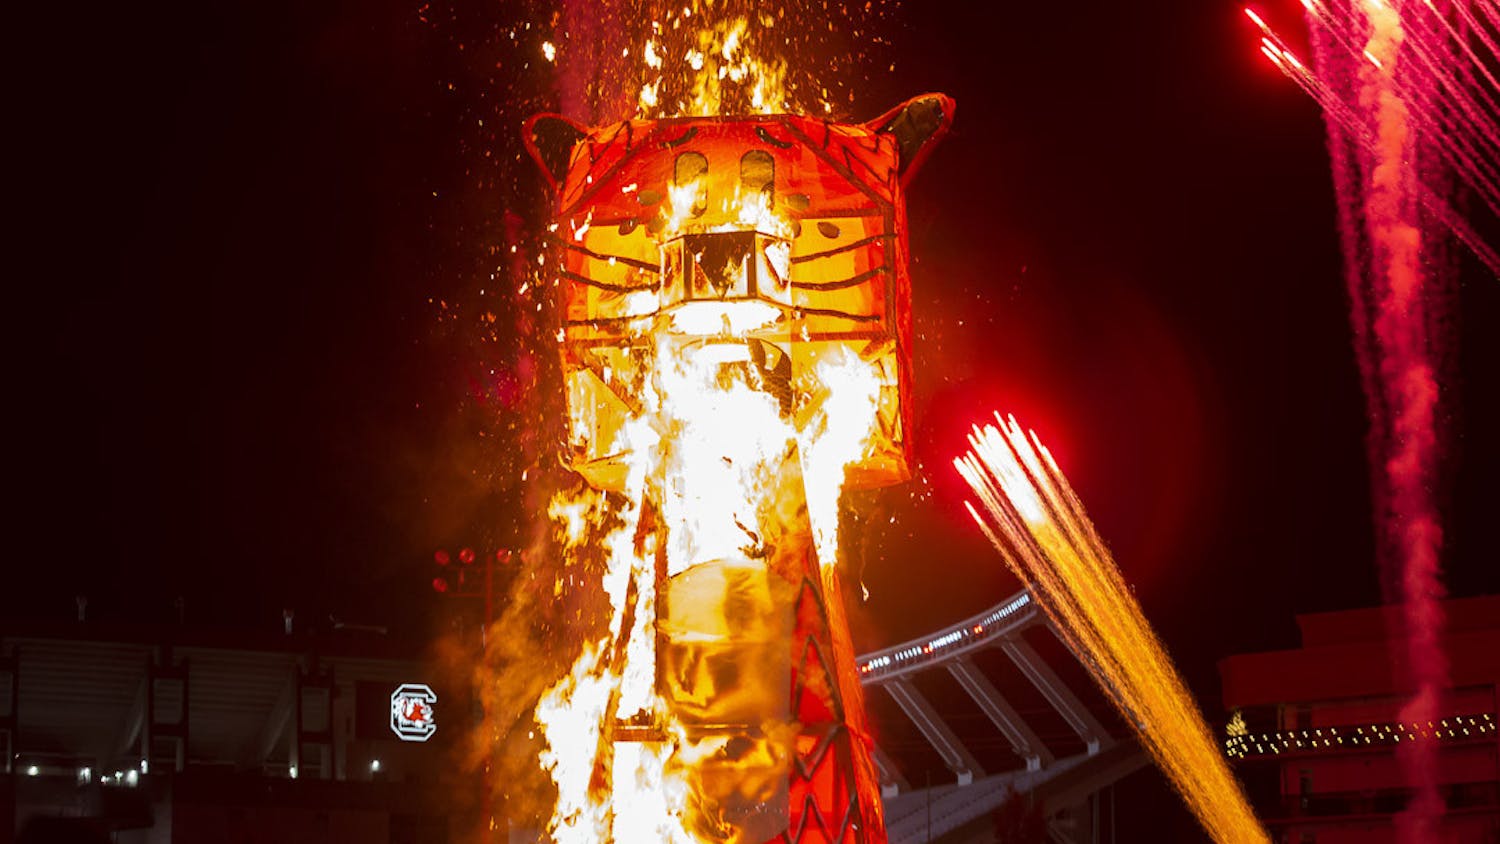 Flames quickly catch and spread throughout the 32.5-foot-tall tiger statue during the Tiger Burning ceremony at the Bluff Road intramural fields on Nov. 21, 2022. The annual event with the University of South Carolina engineering department marks the beginning of rivalry week in preparation for the South Carolina and Clemson football game.